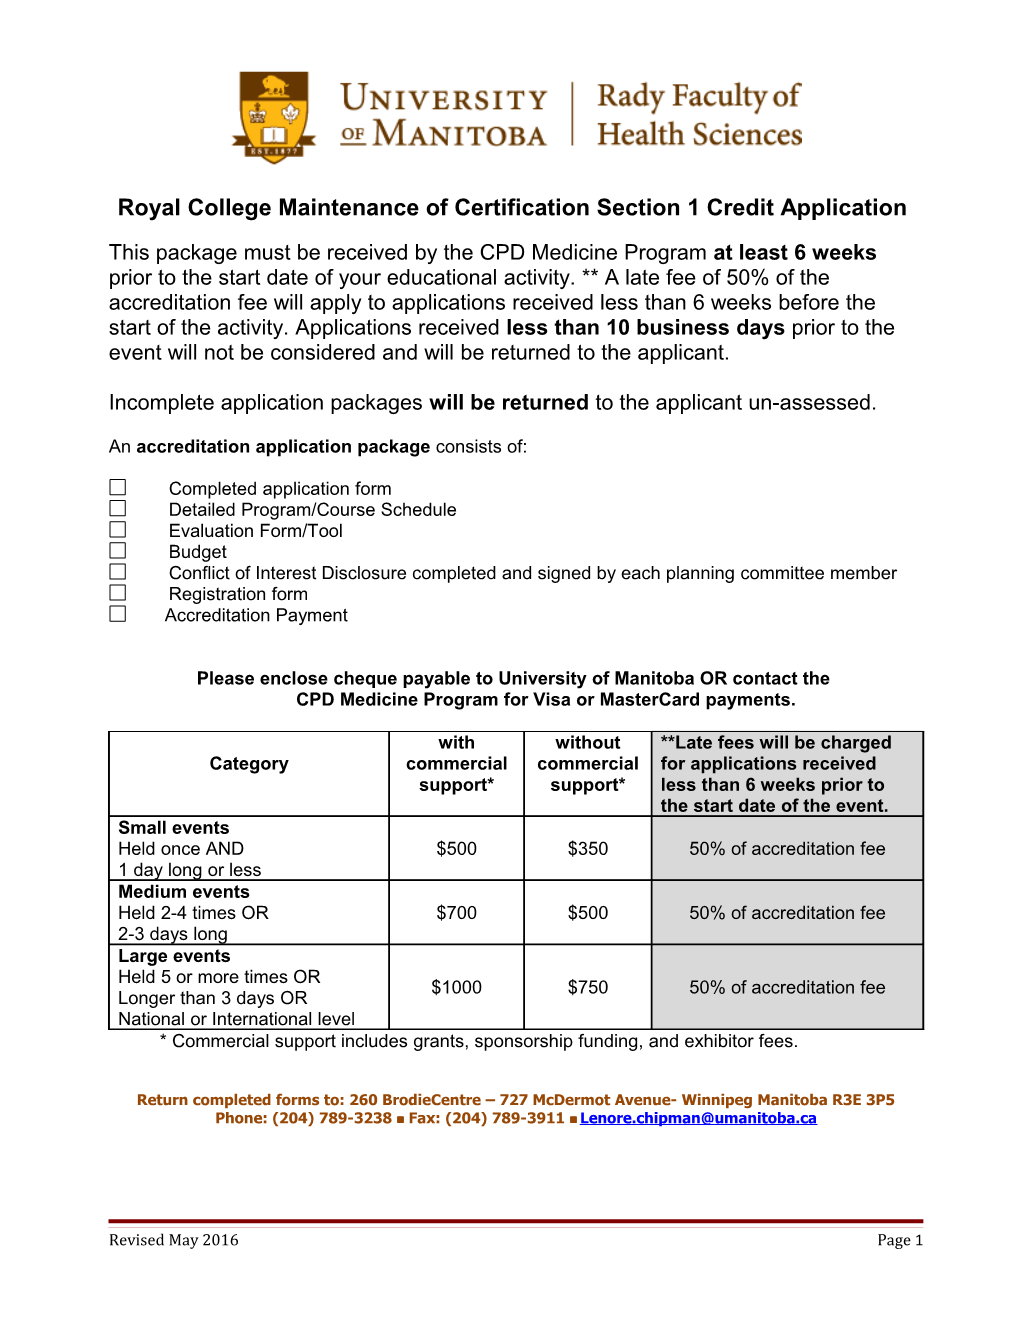 Royal College Maintenance of Certification Section 1Creditapplication